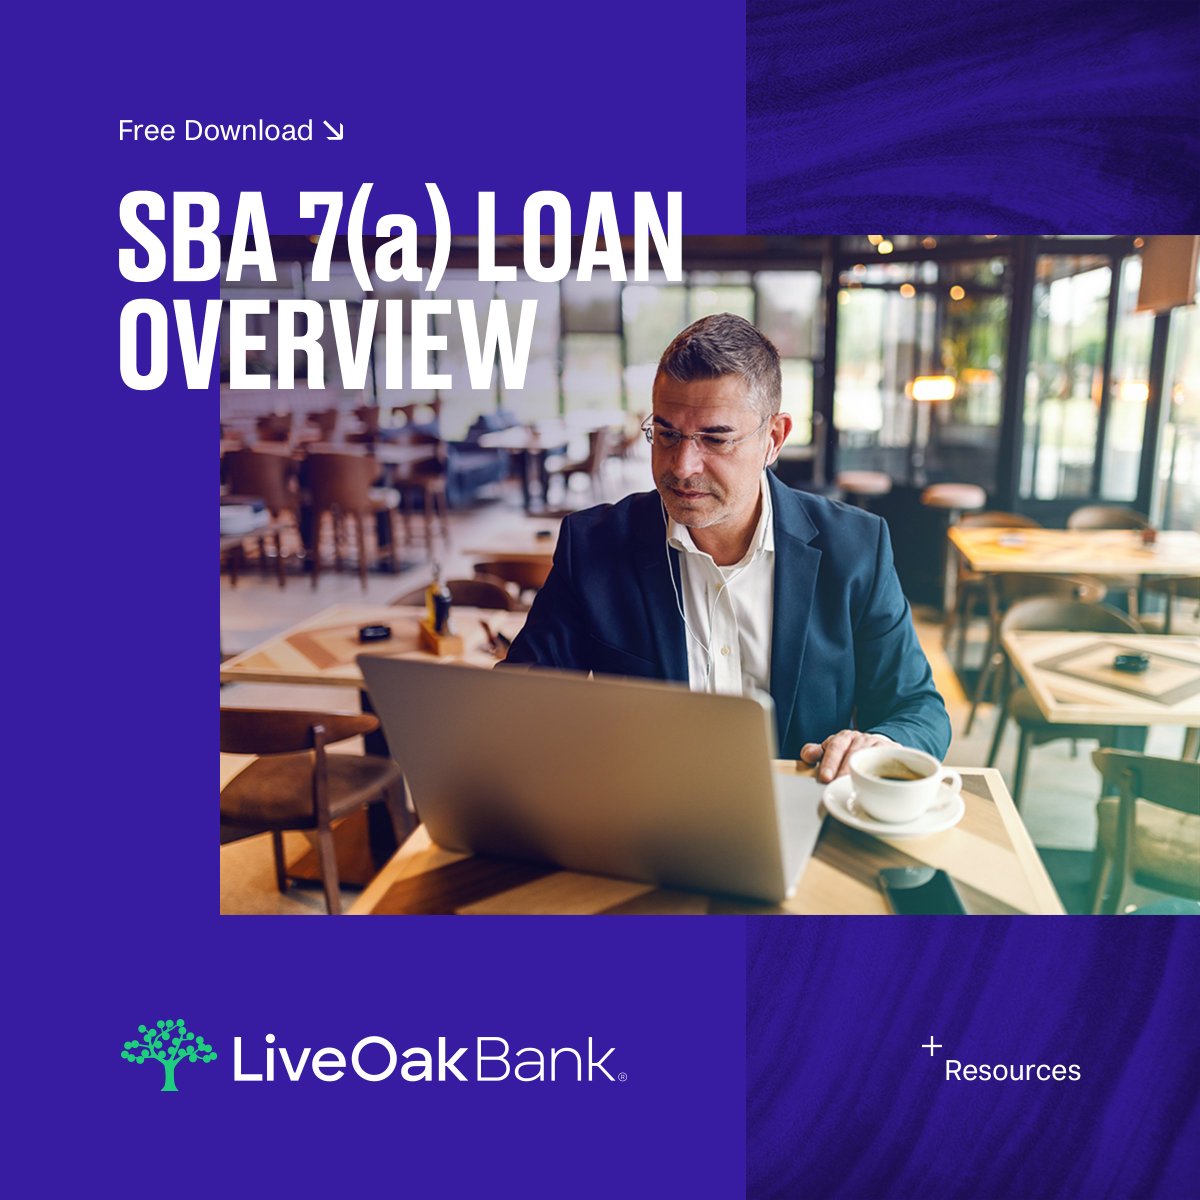 Did you know the SBA 7(a) loan is the most common SBA loan product? Our team is experienced and can confidently guide you through the lending process. Download our SBA 7(a) guide to learn more on the basics: bit.ly/4aF3zUi Member FDIC.